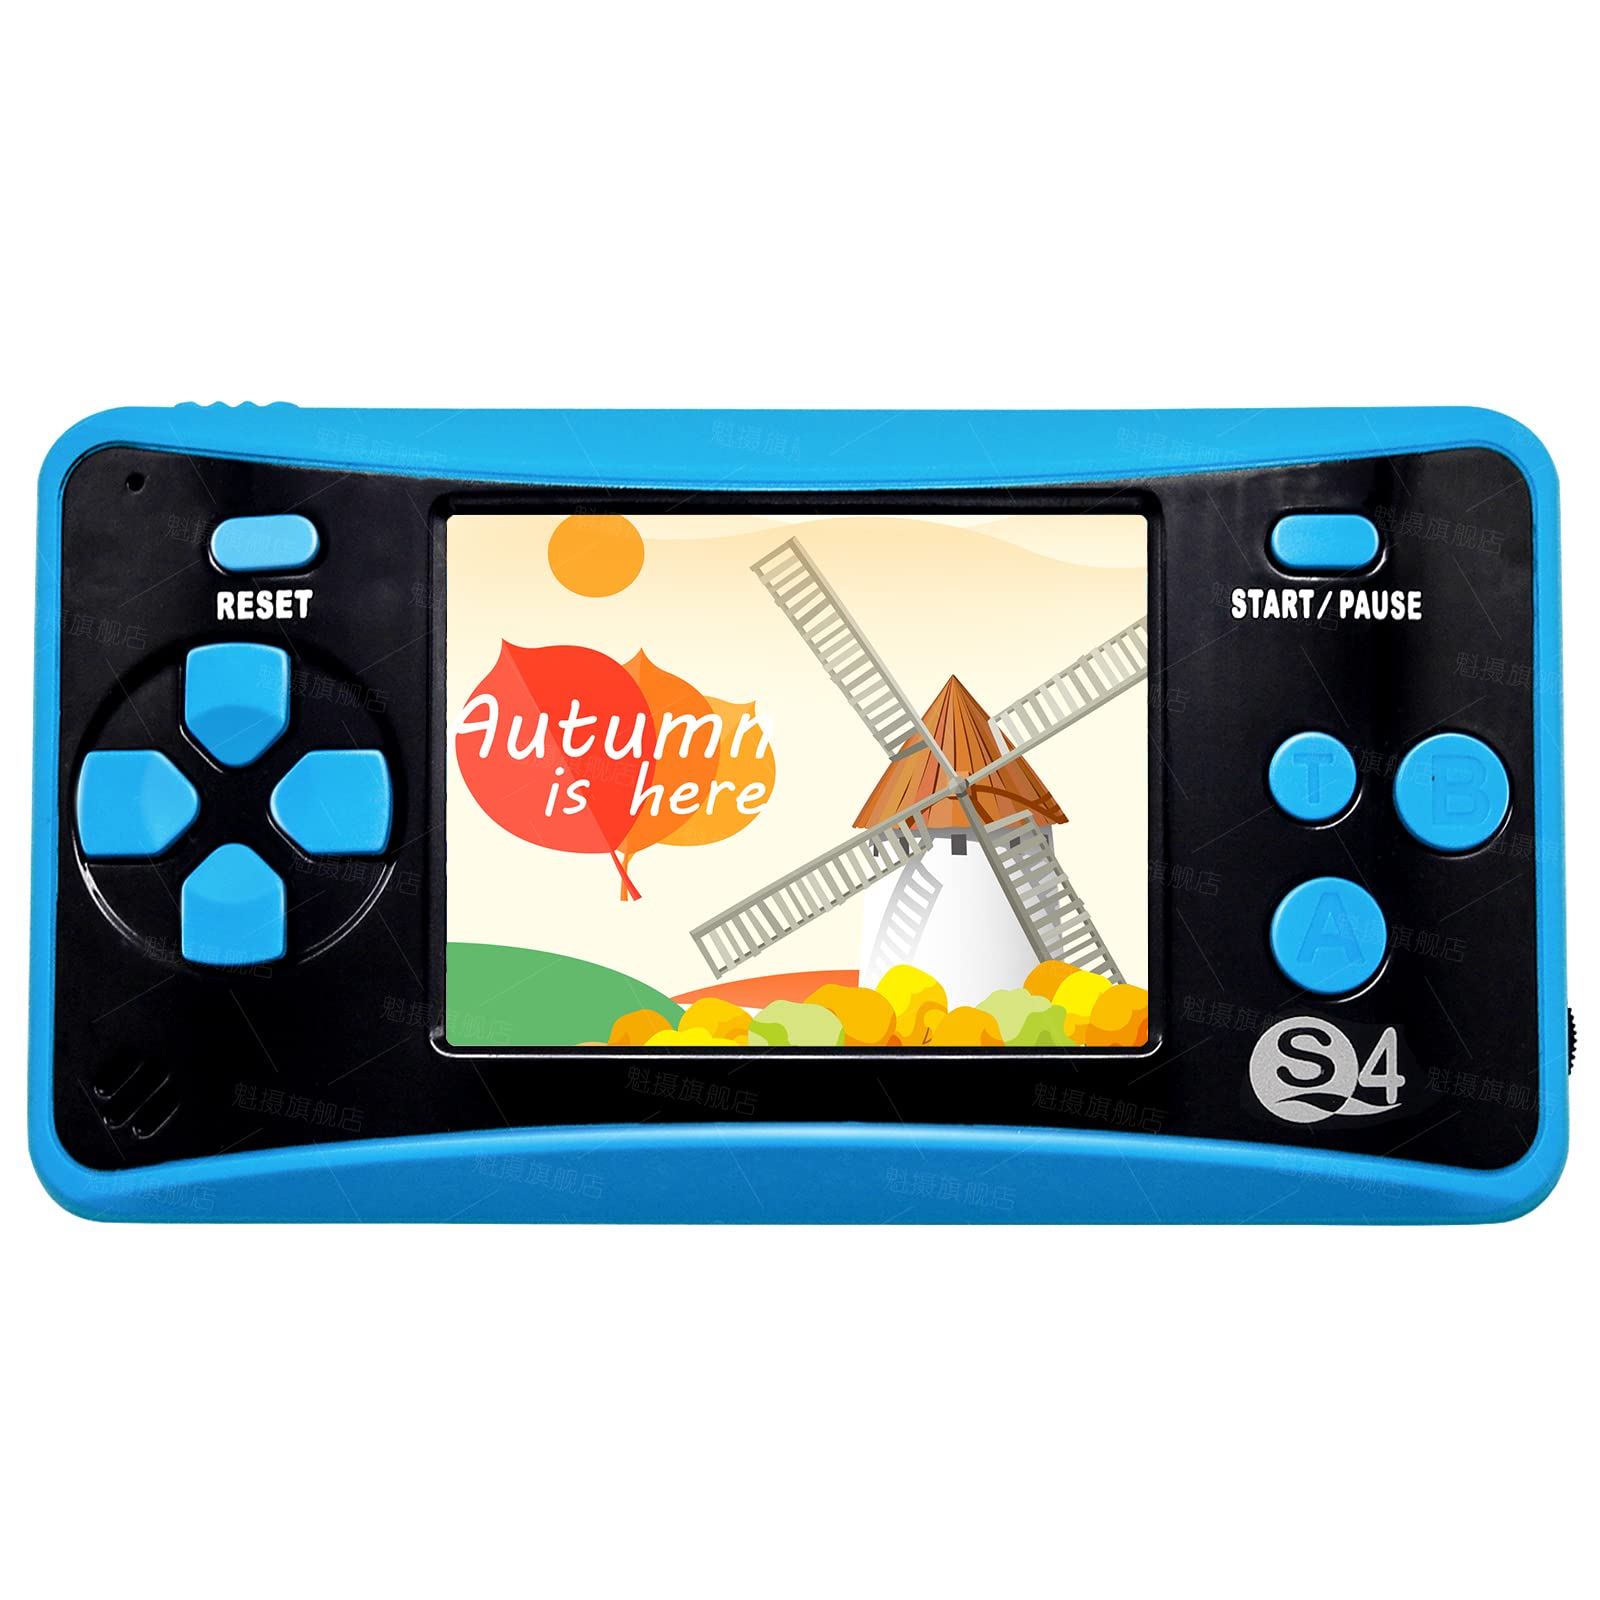 Retro Handheld Game Console, 182 in 1 Video Games Console 2.5